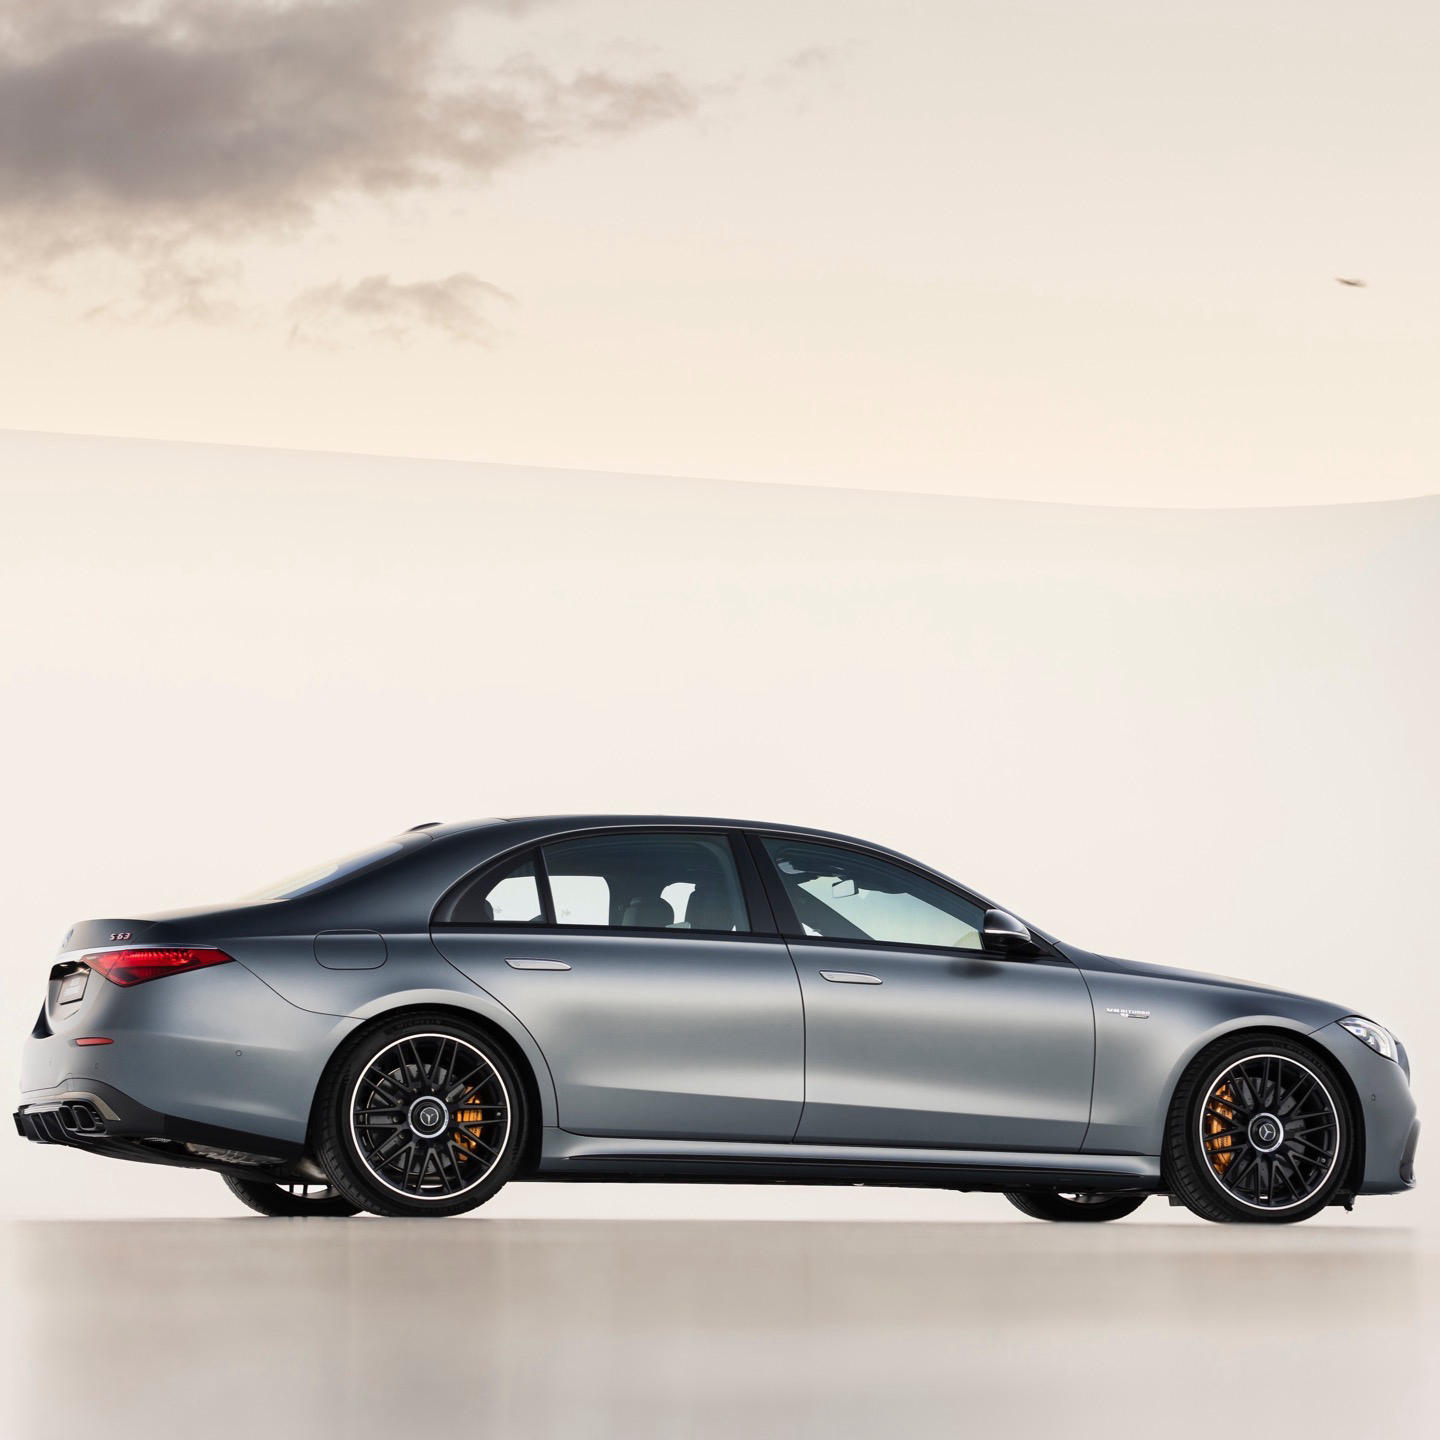 Mercedes-AMG - Radiating luxury and beaming with power